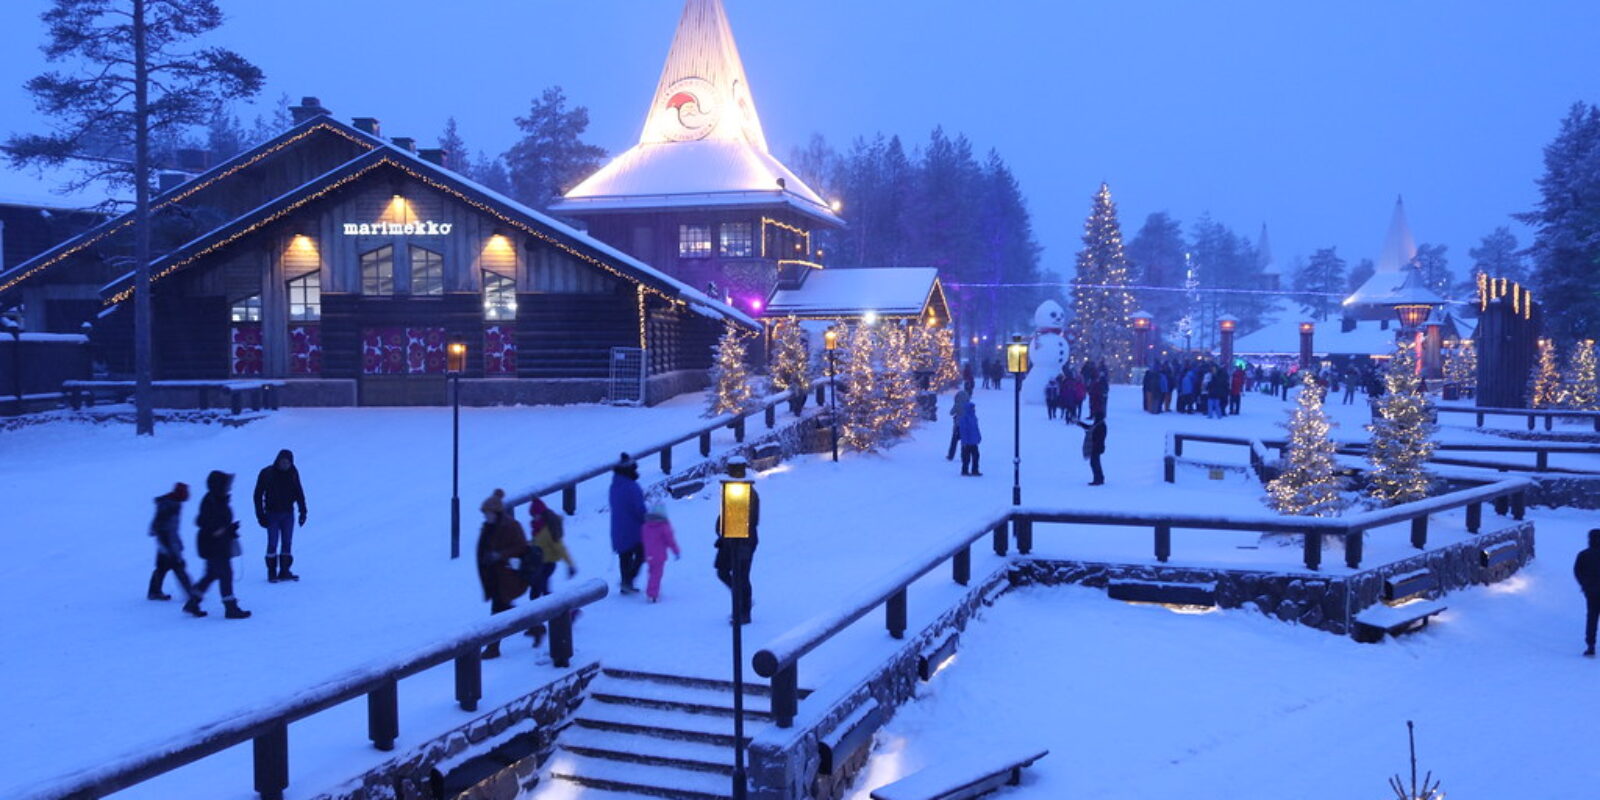 An image of tourists visiting the Santa Claus Village in Finland.